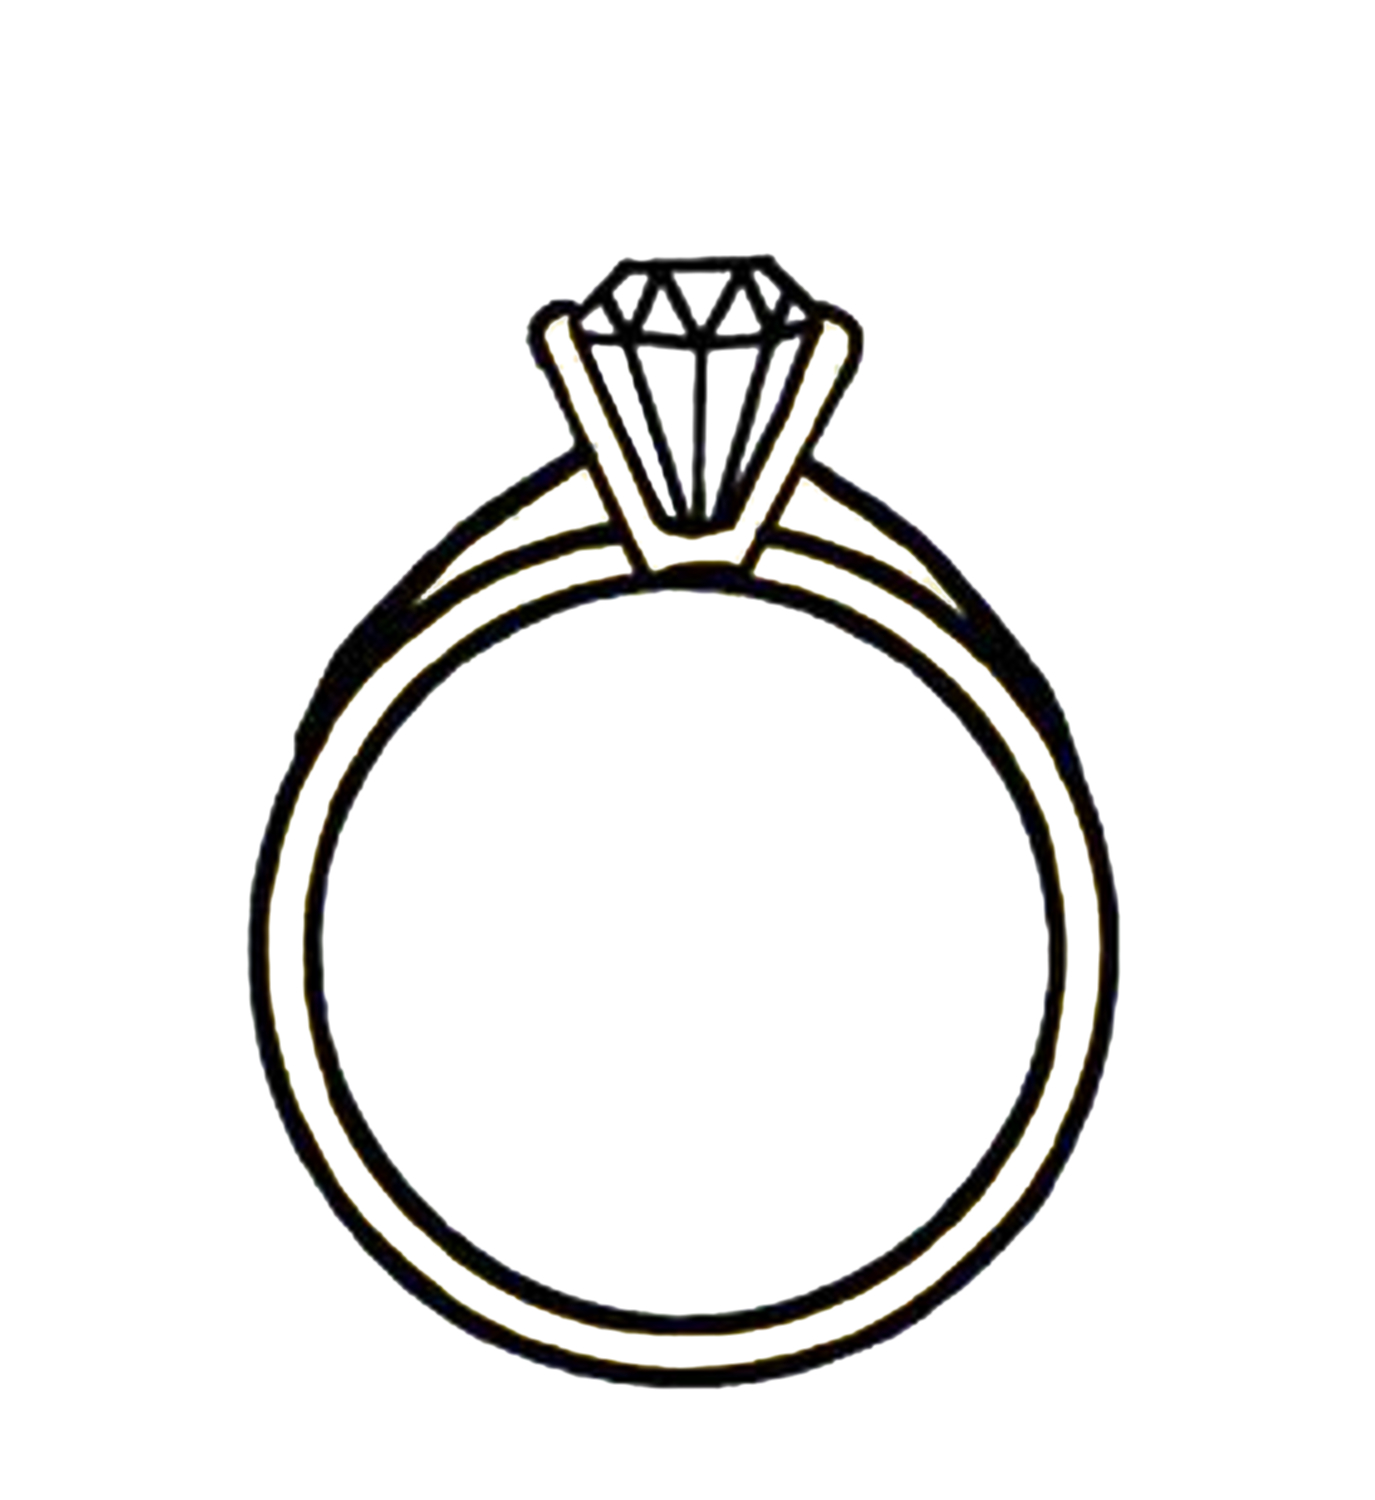 Engagement ring clipart black and white free